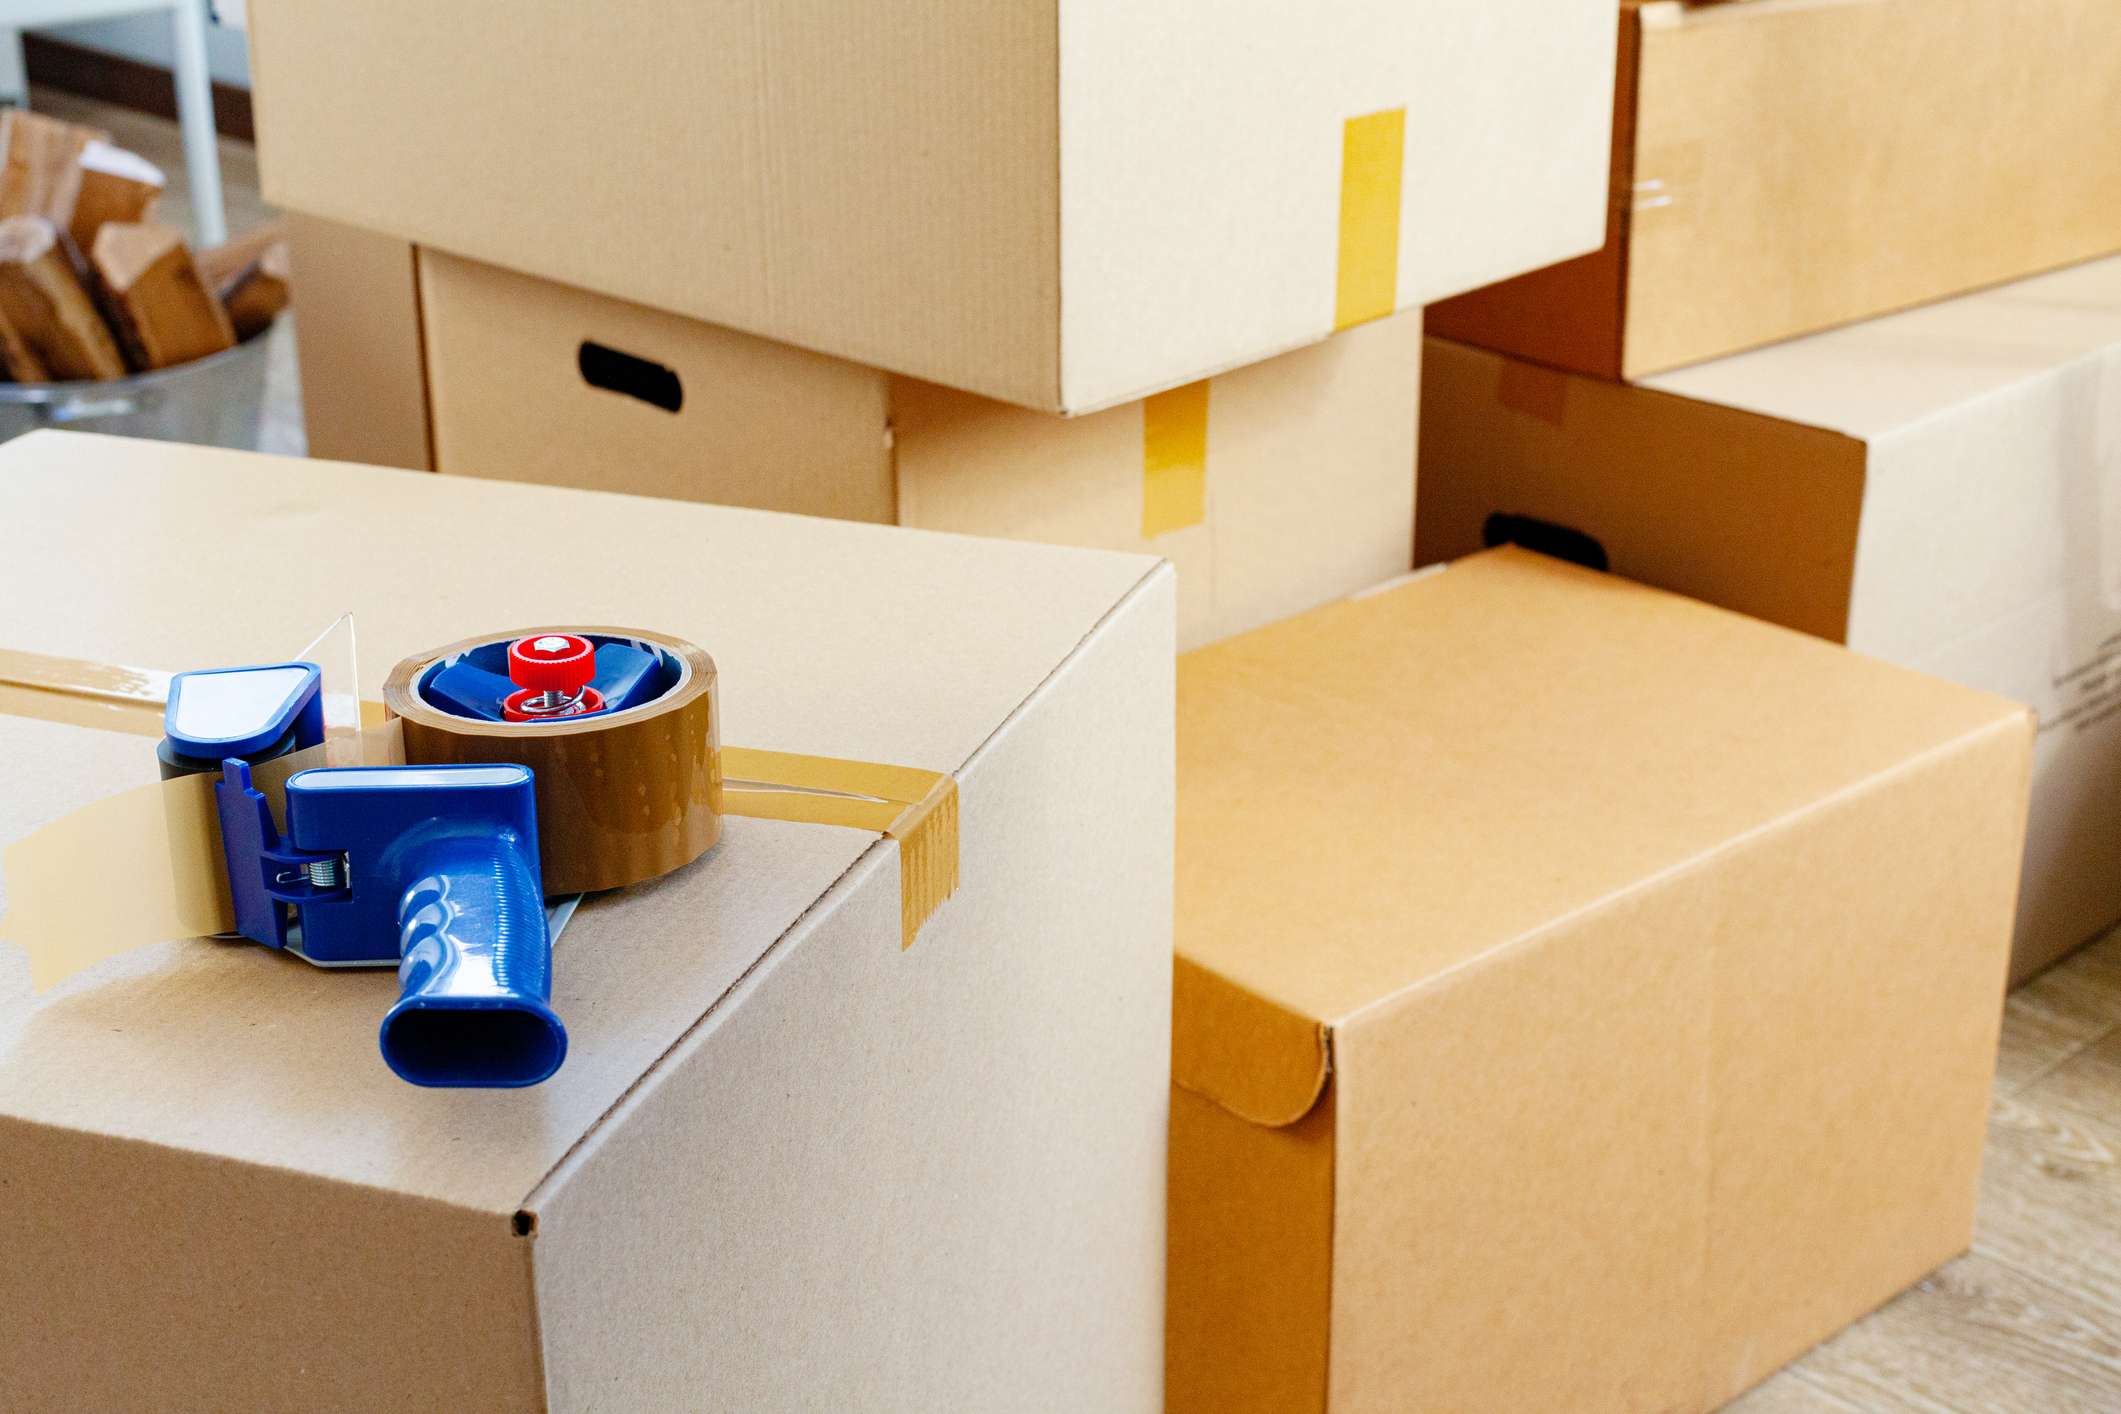 Why You Should Buy New Moving Boxes